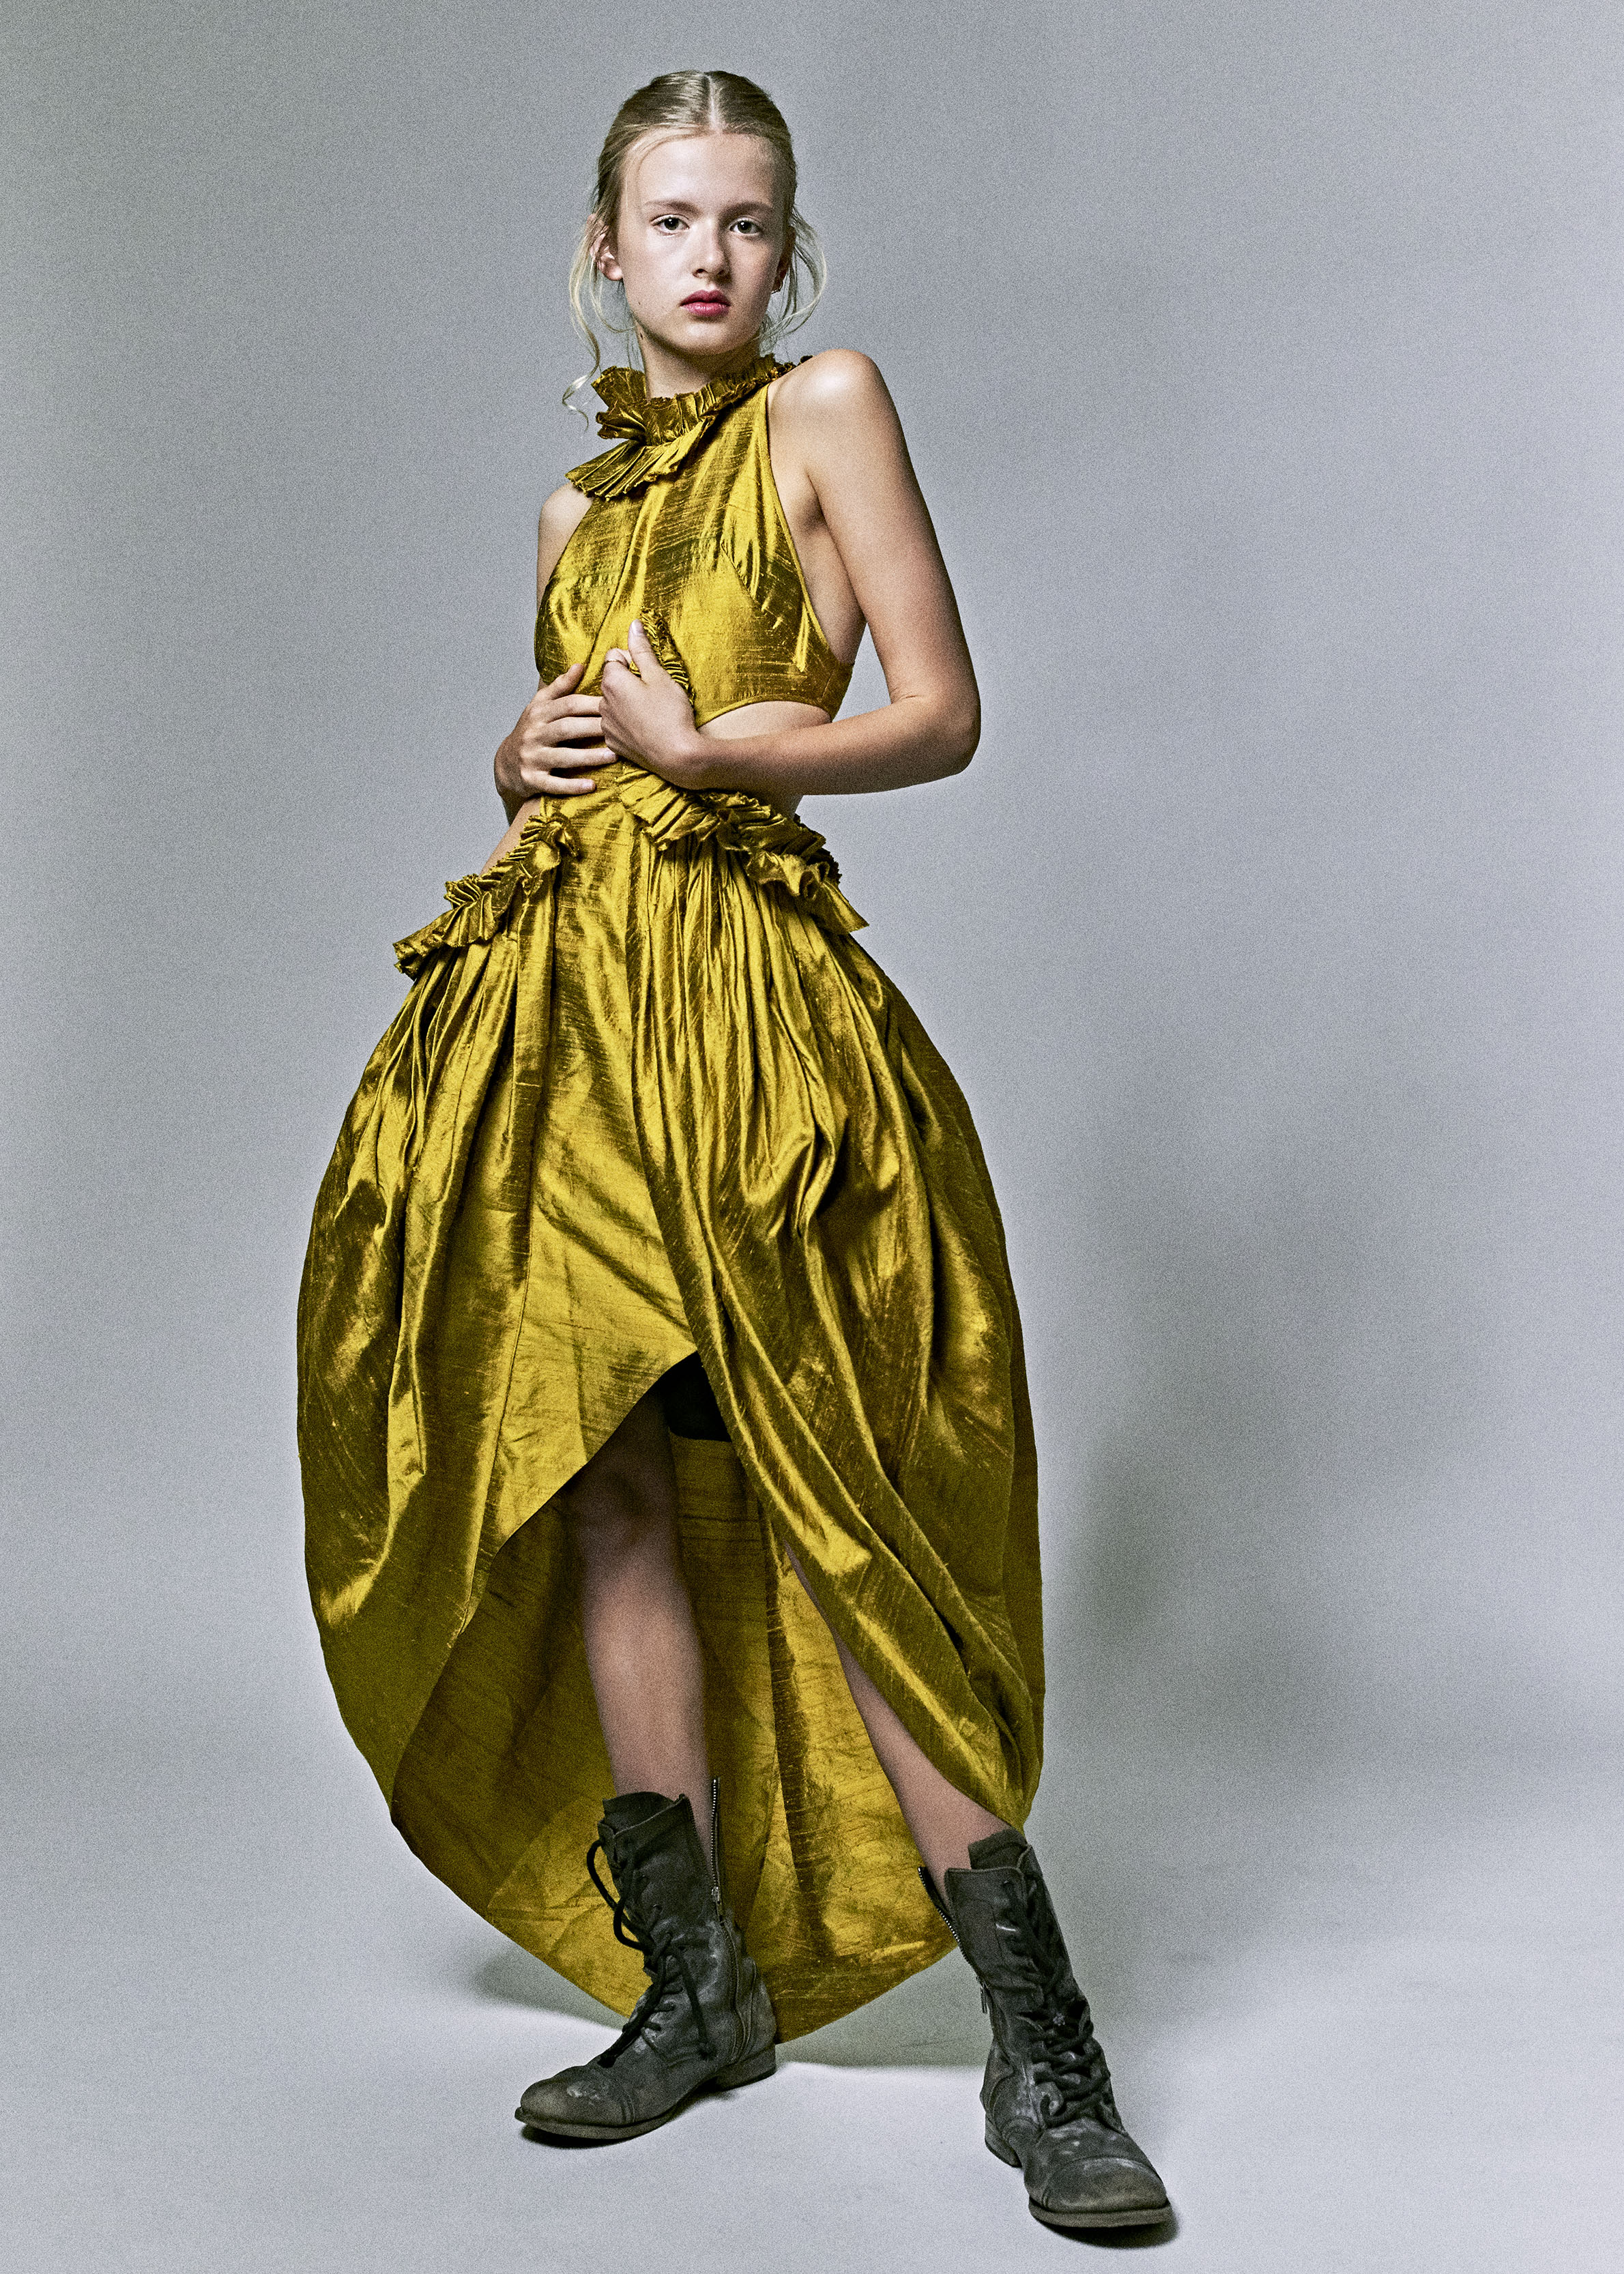 Copy of kelsey randall model gold yellow citrine raw silk shantung asymmetrical ruffle sleeve side cut out gathered ruffled flounce long gown high-low hem tulip high neck dress black leather combat...